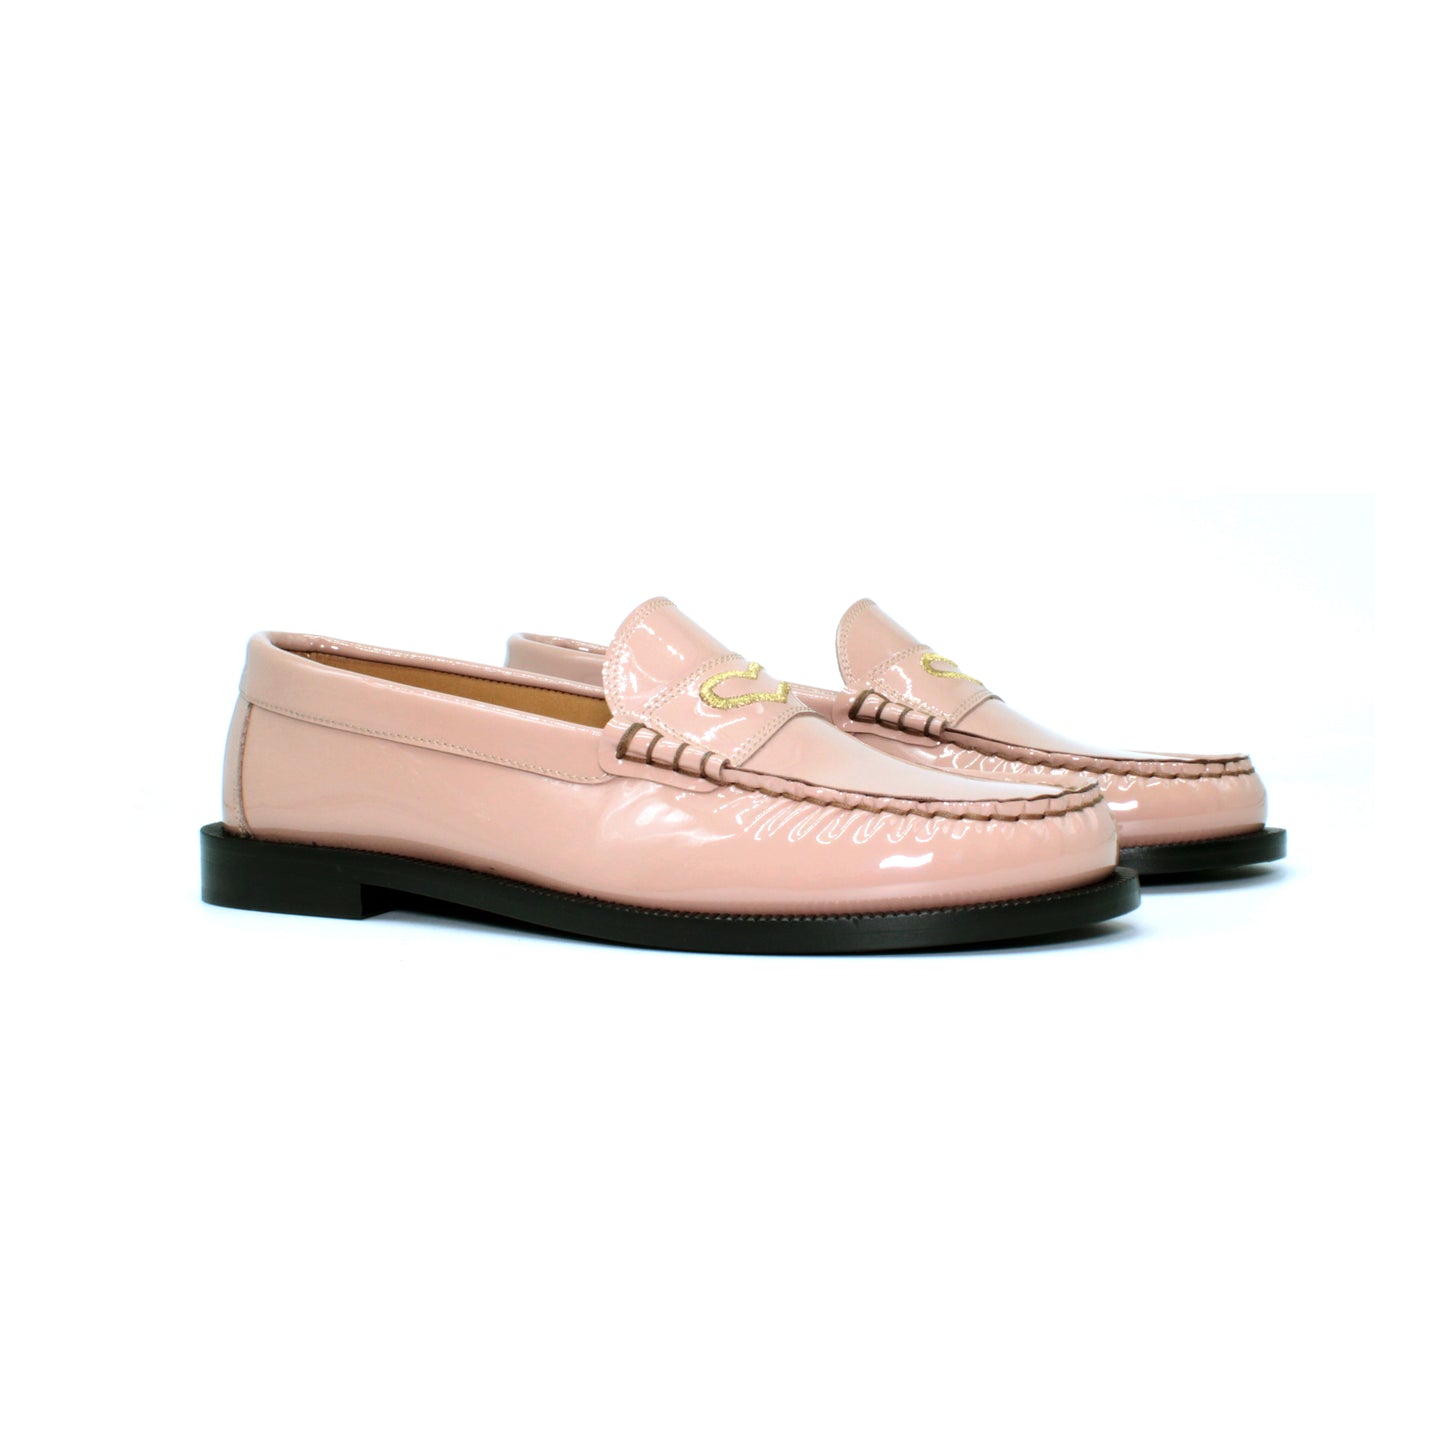 Loafer in tutu color patent leather